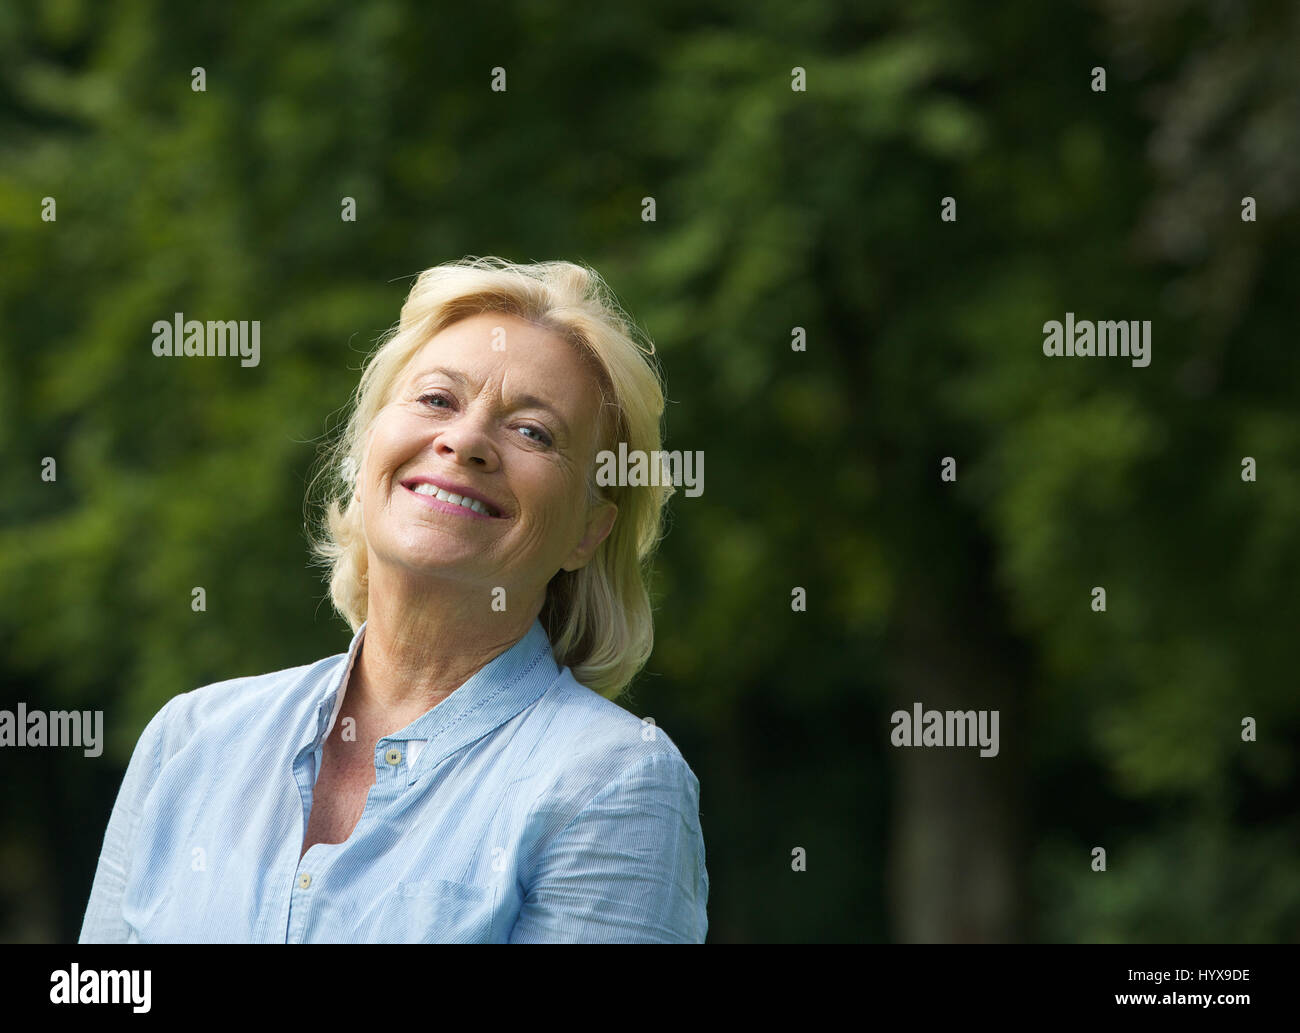 Close up portrait of an elderly woman smiling outdoors Stock Photo